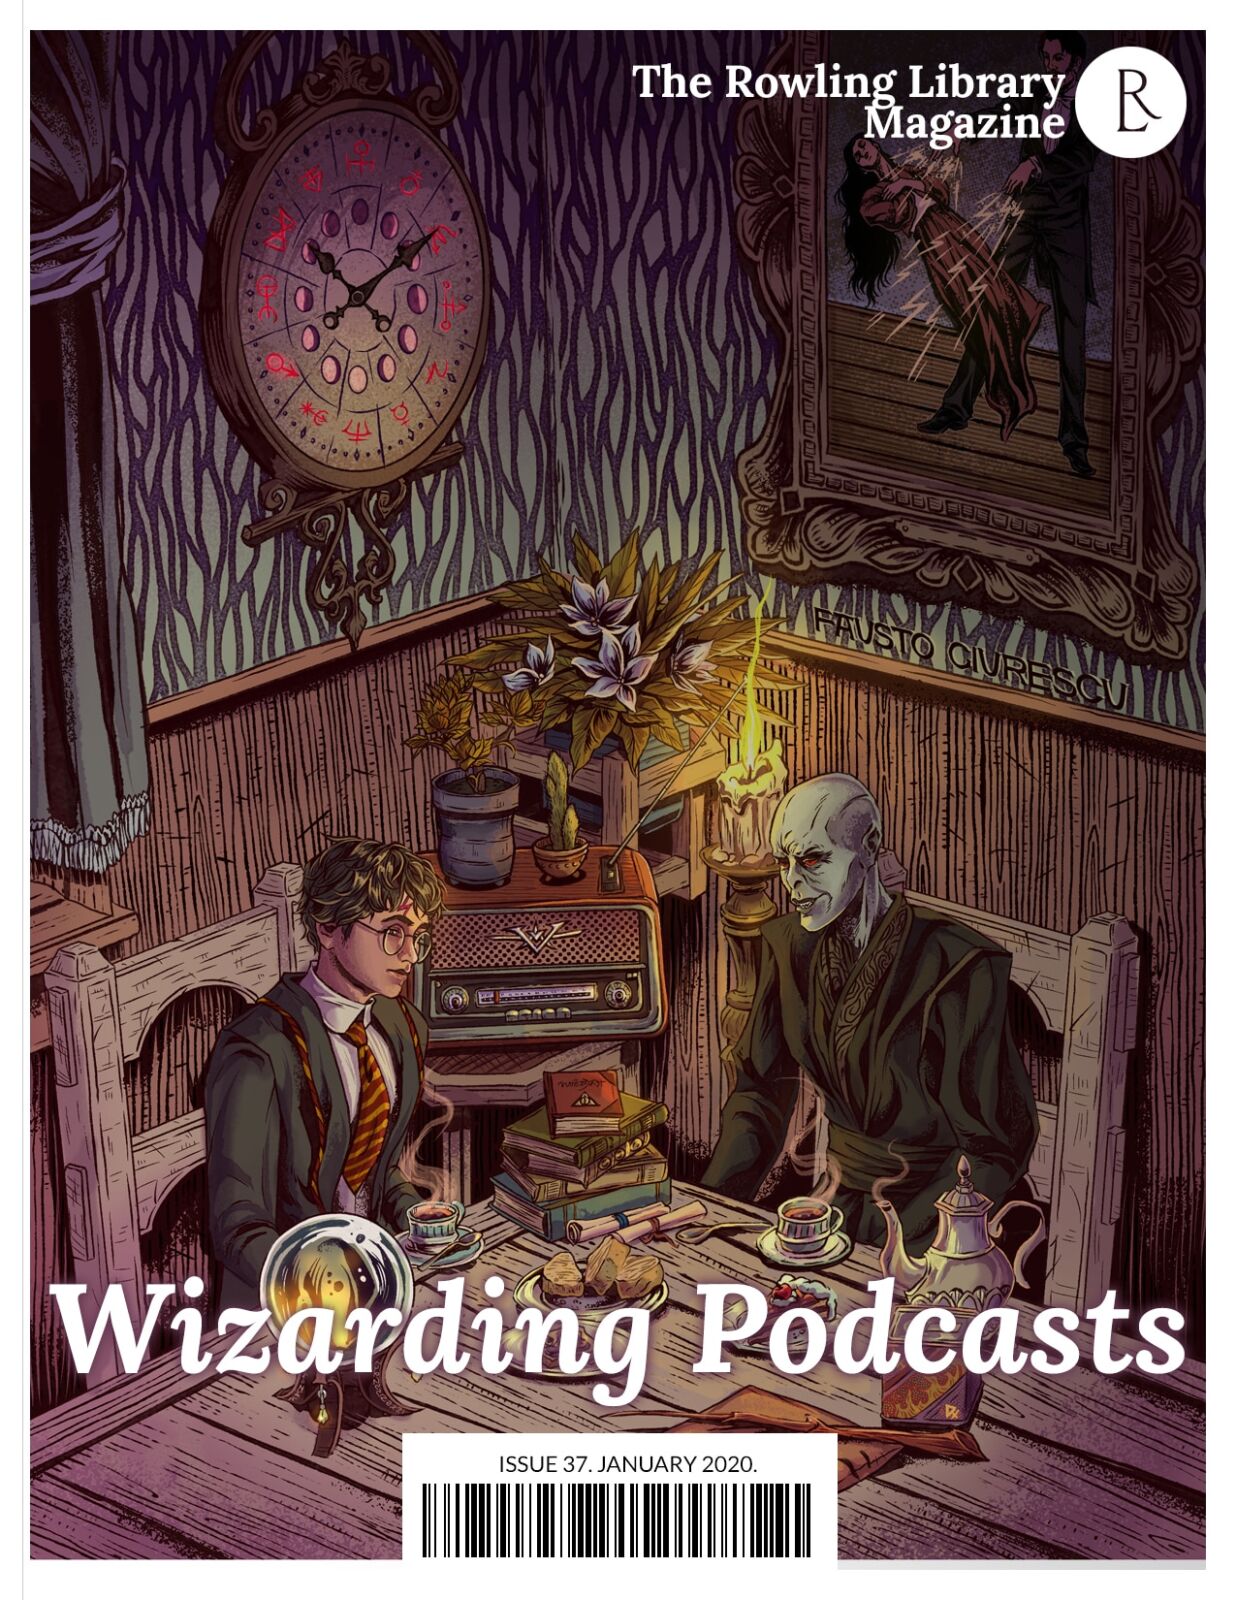 The Rowling Library Magazine #37 (January 2020): Wizarding Podcasts